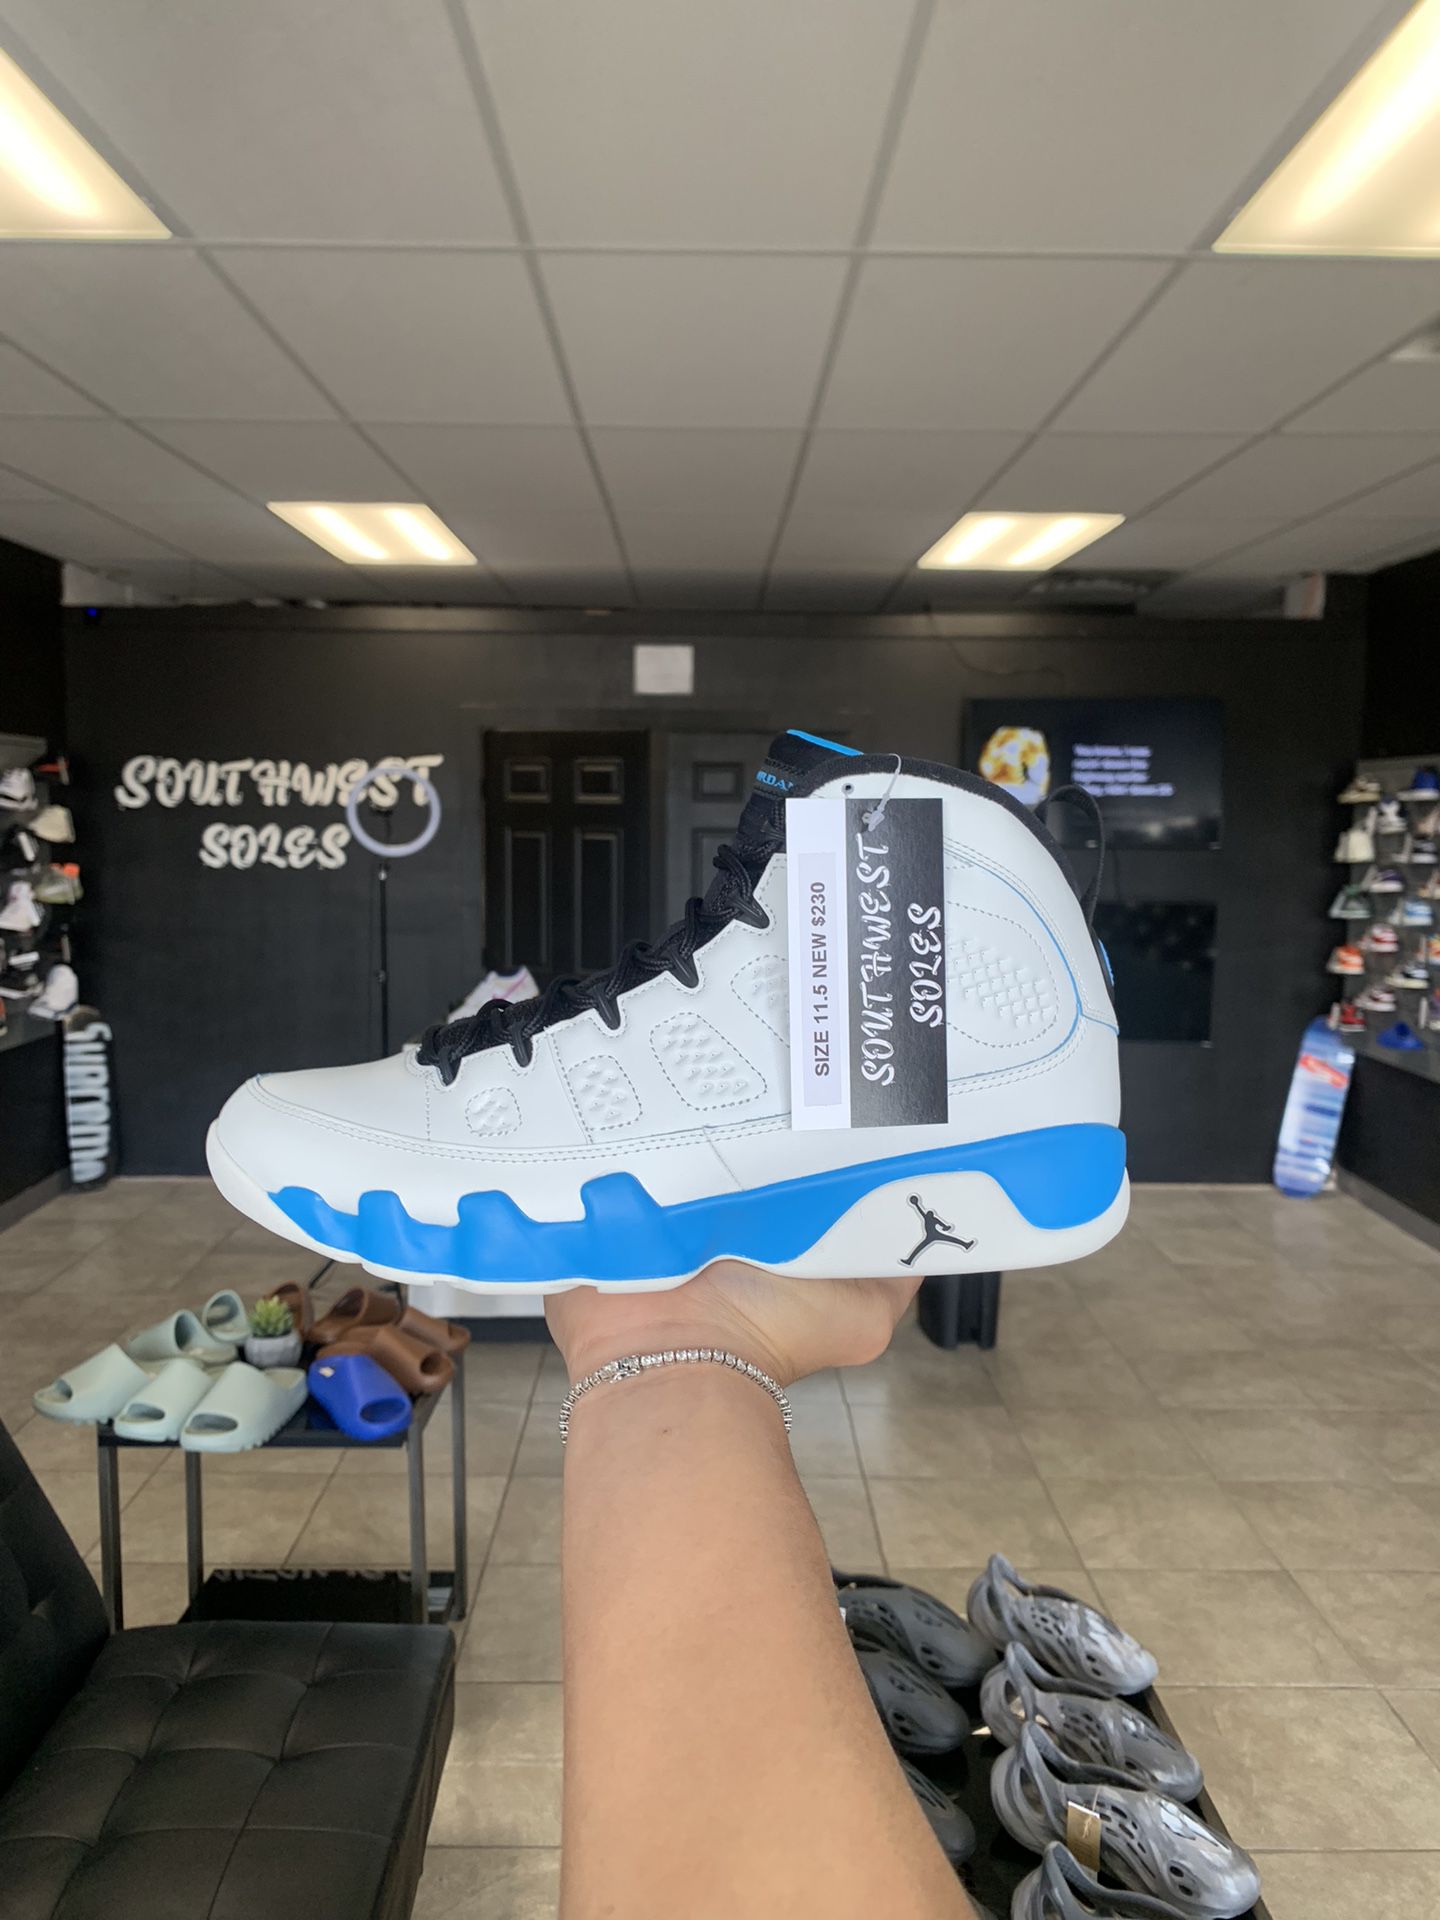 Jordan 9 Powder Blue Size 11.5 Available In Store!